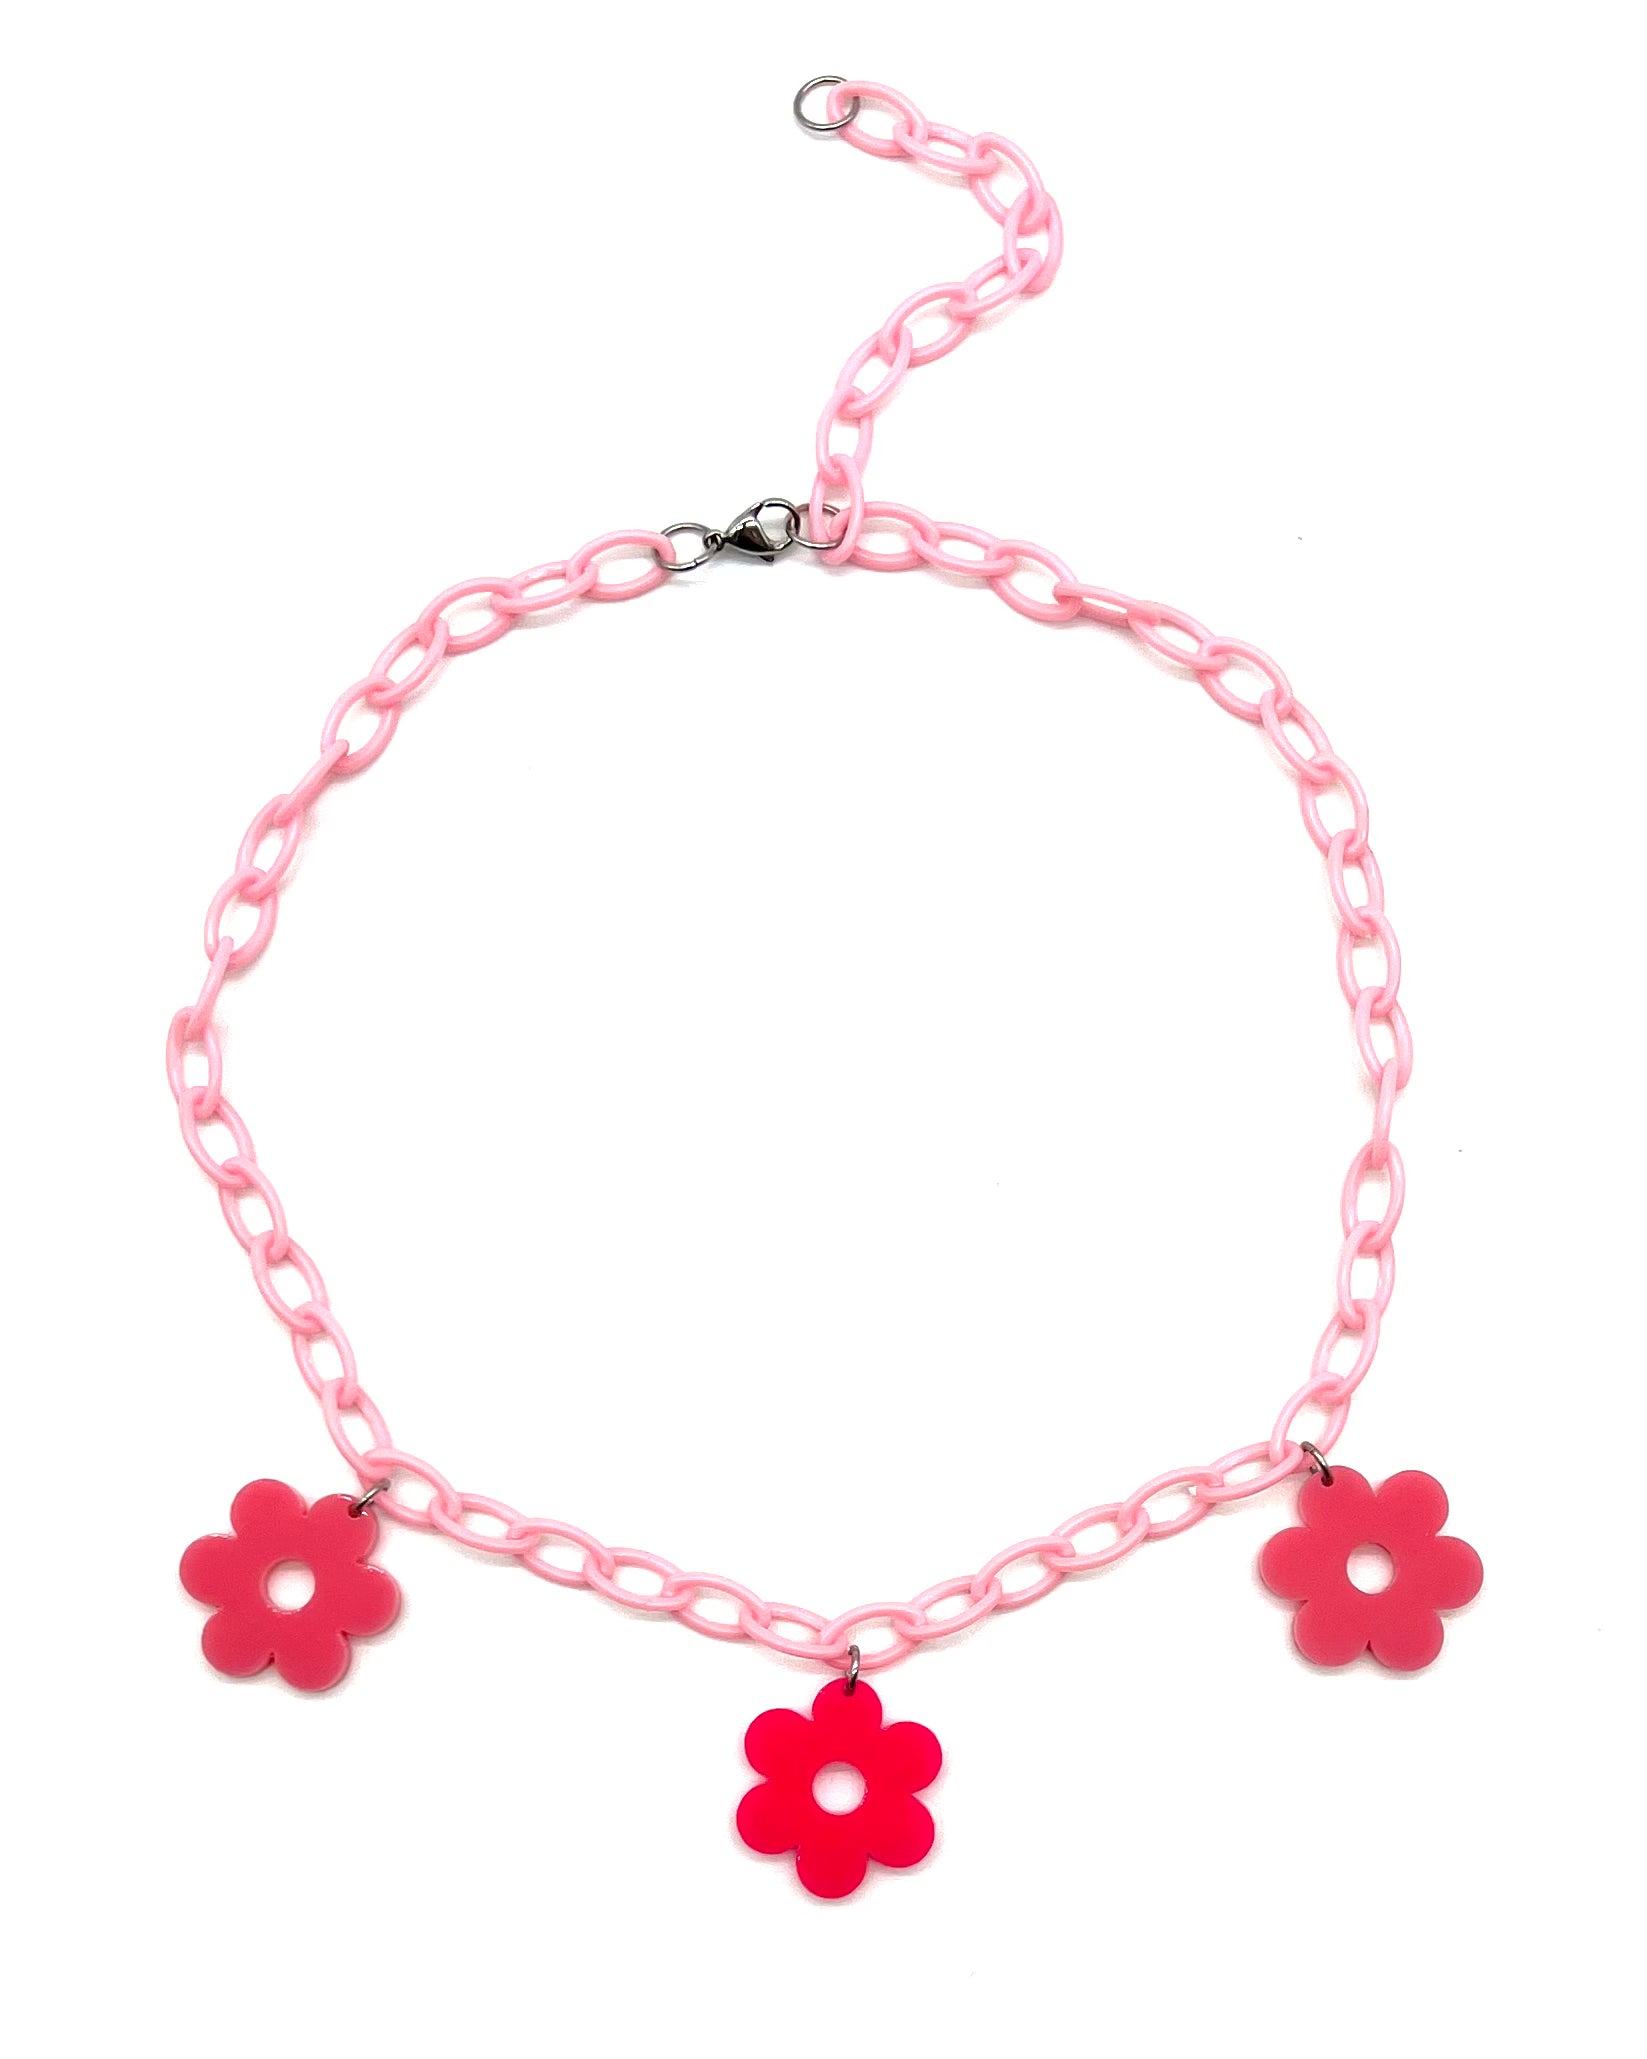 The Flower Power Pink Choker featuring a light pink plastic chain with three alternating light and dark pink daisy charms.